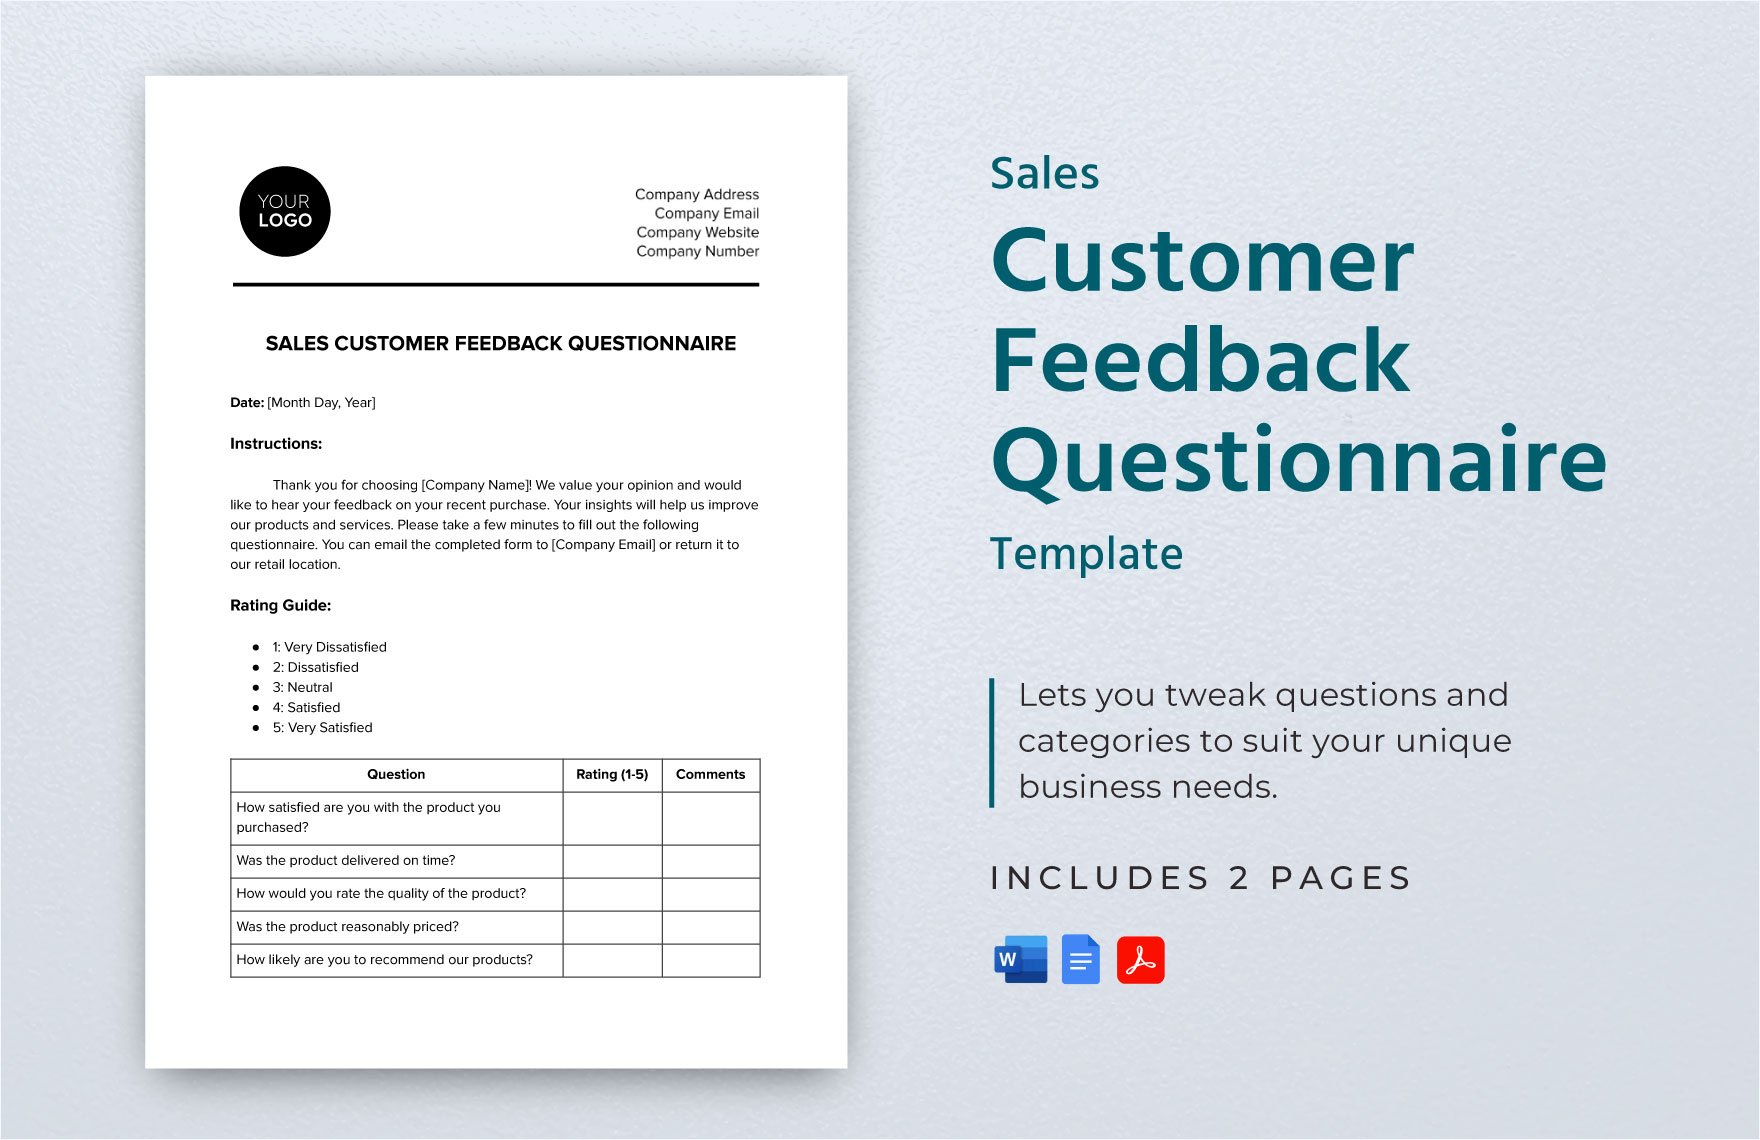 Sales Customer Feedback Questionnaire Template